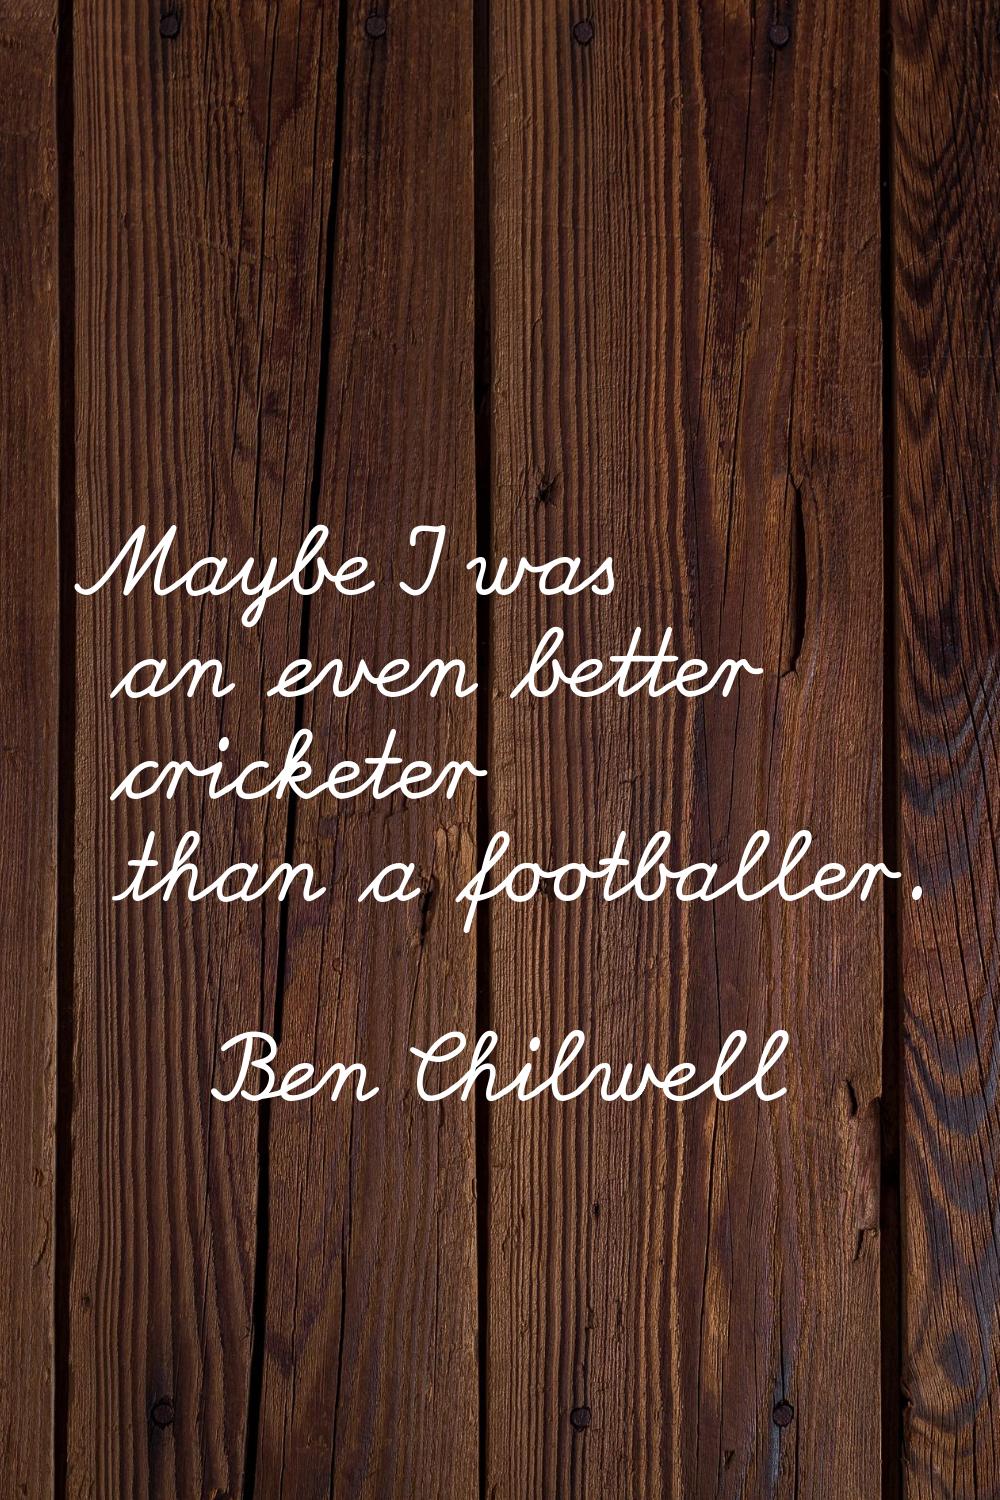 Maybe I was an even better cricketer than a footballer.